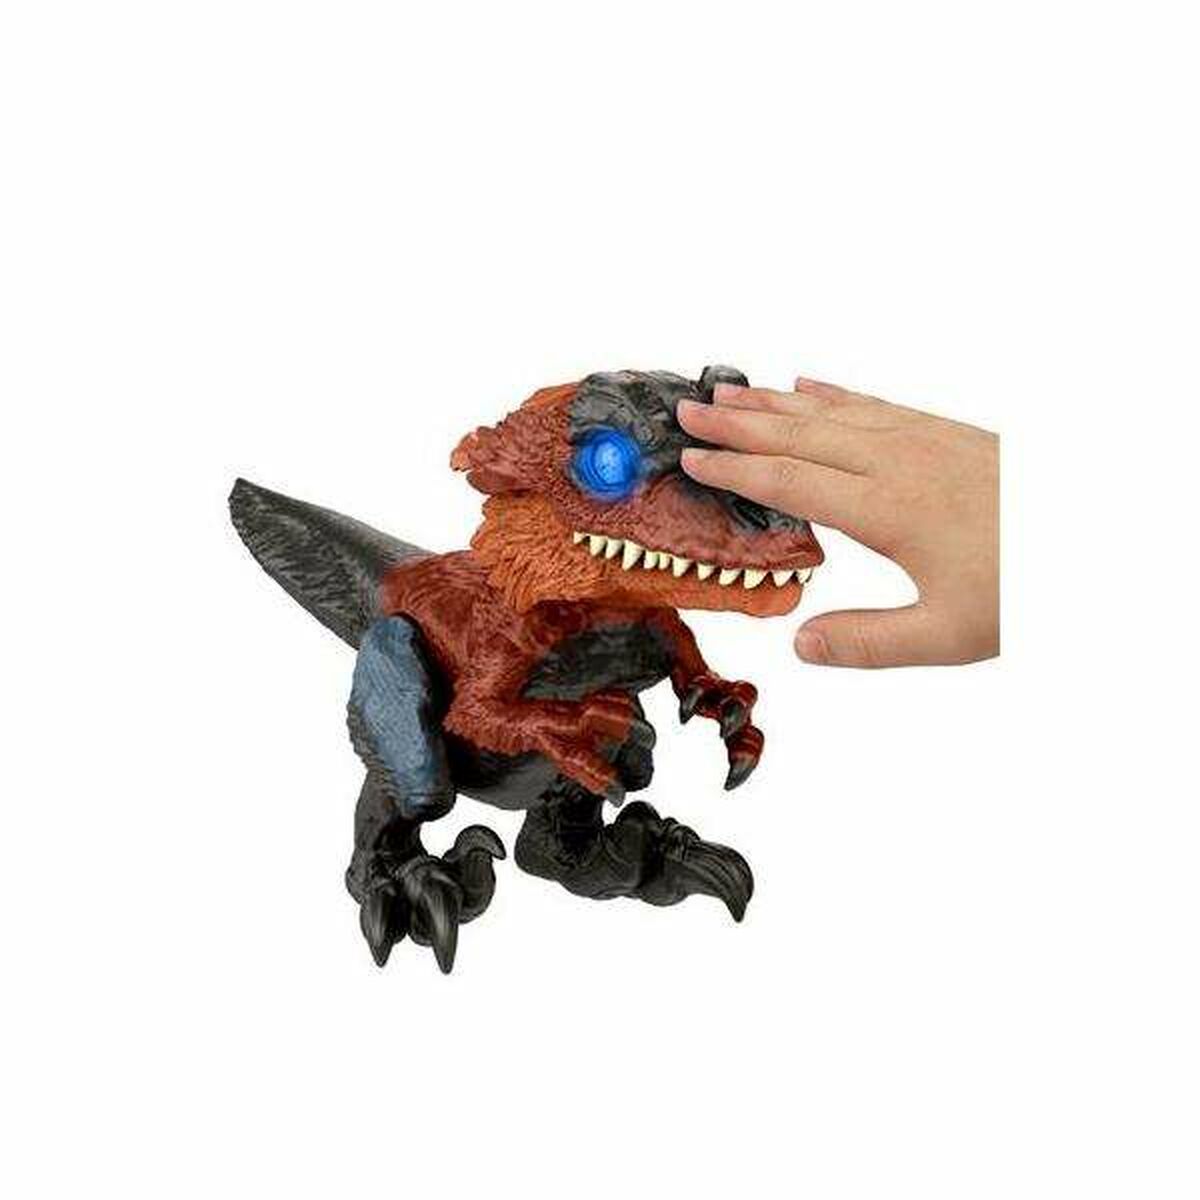 Jointed Figure Jurassic World Uncaged with sound 26 x 18 x 54 cm